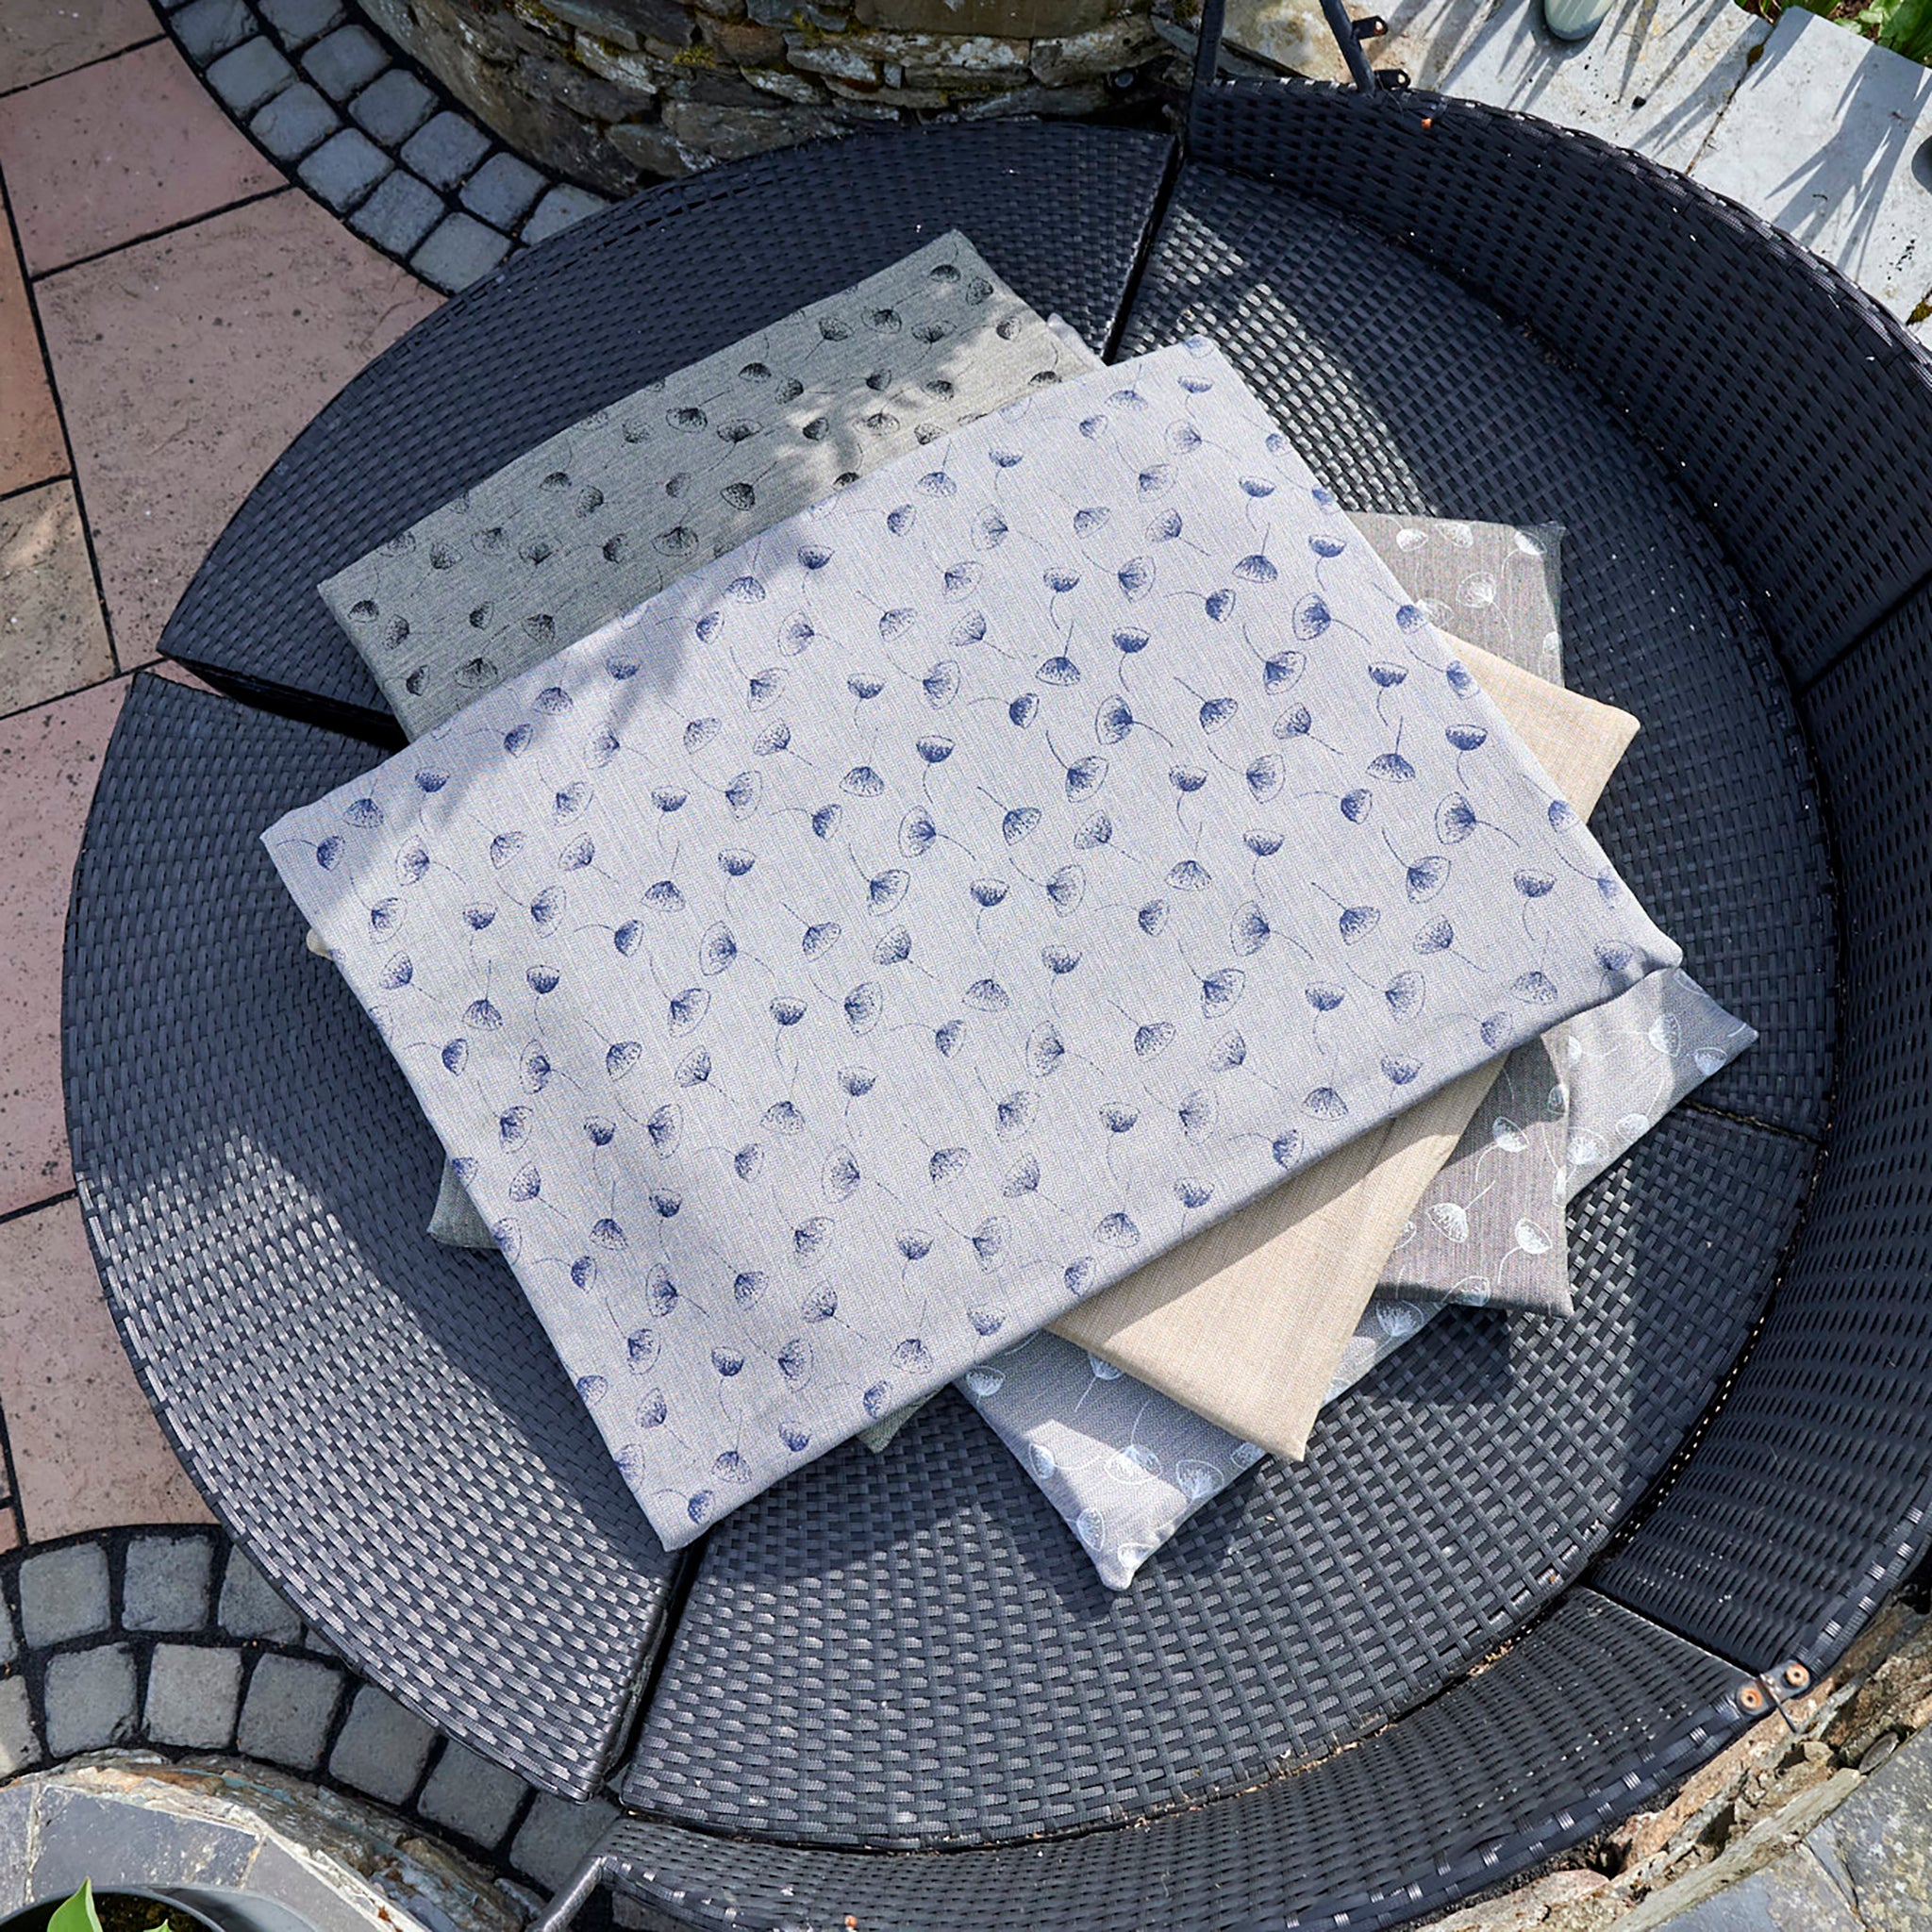 Chimney Sheep Luxury Wool Filled dog beds, placed neatly in a pile. The blue with dark blue flowers pattern is ontop, with the olive and grey patterns sitting beneath